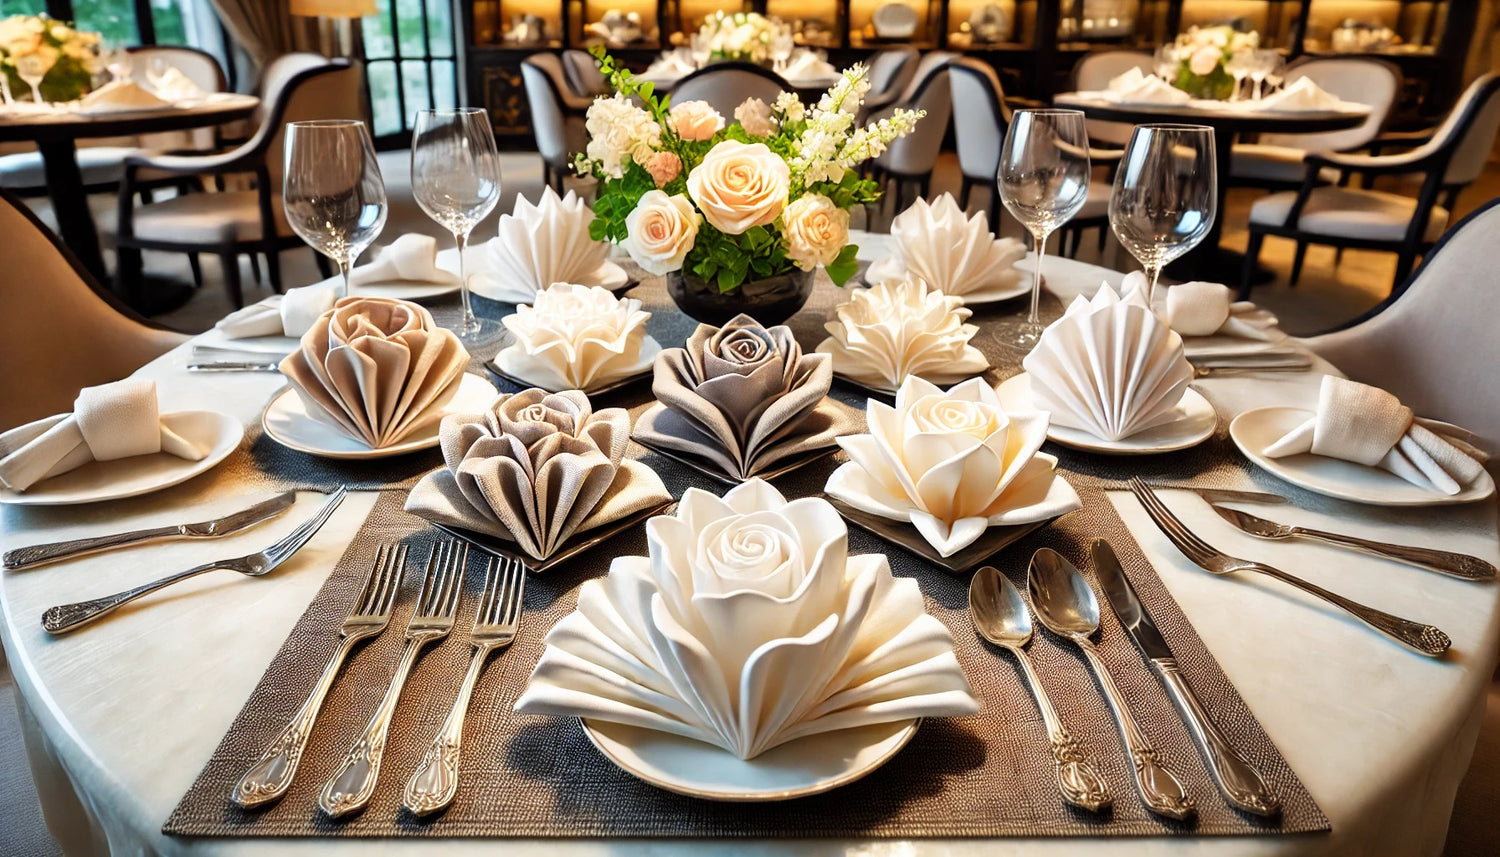 A variety of folded napkins displayed on a dining table. The Linen napkins are made of high-quality cotton, each folded into elegant shapes 